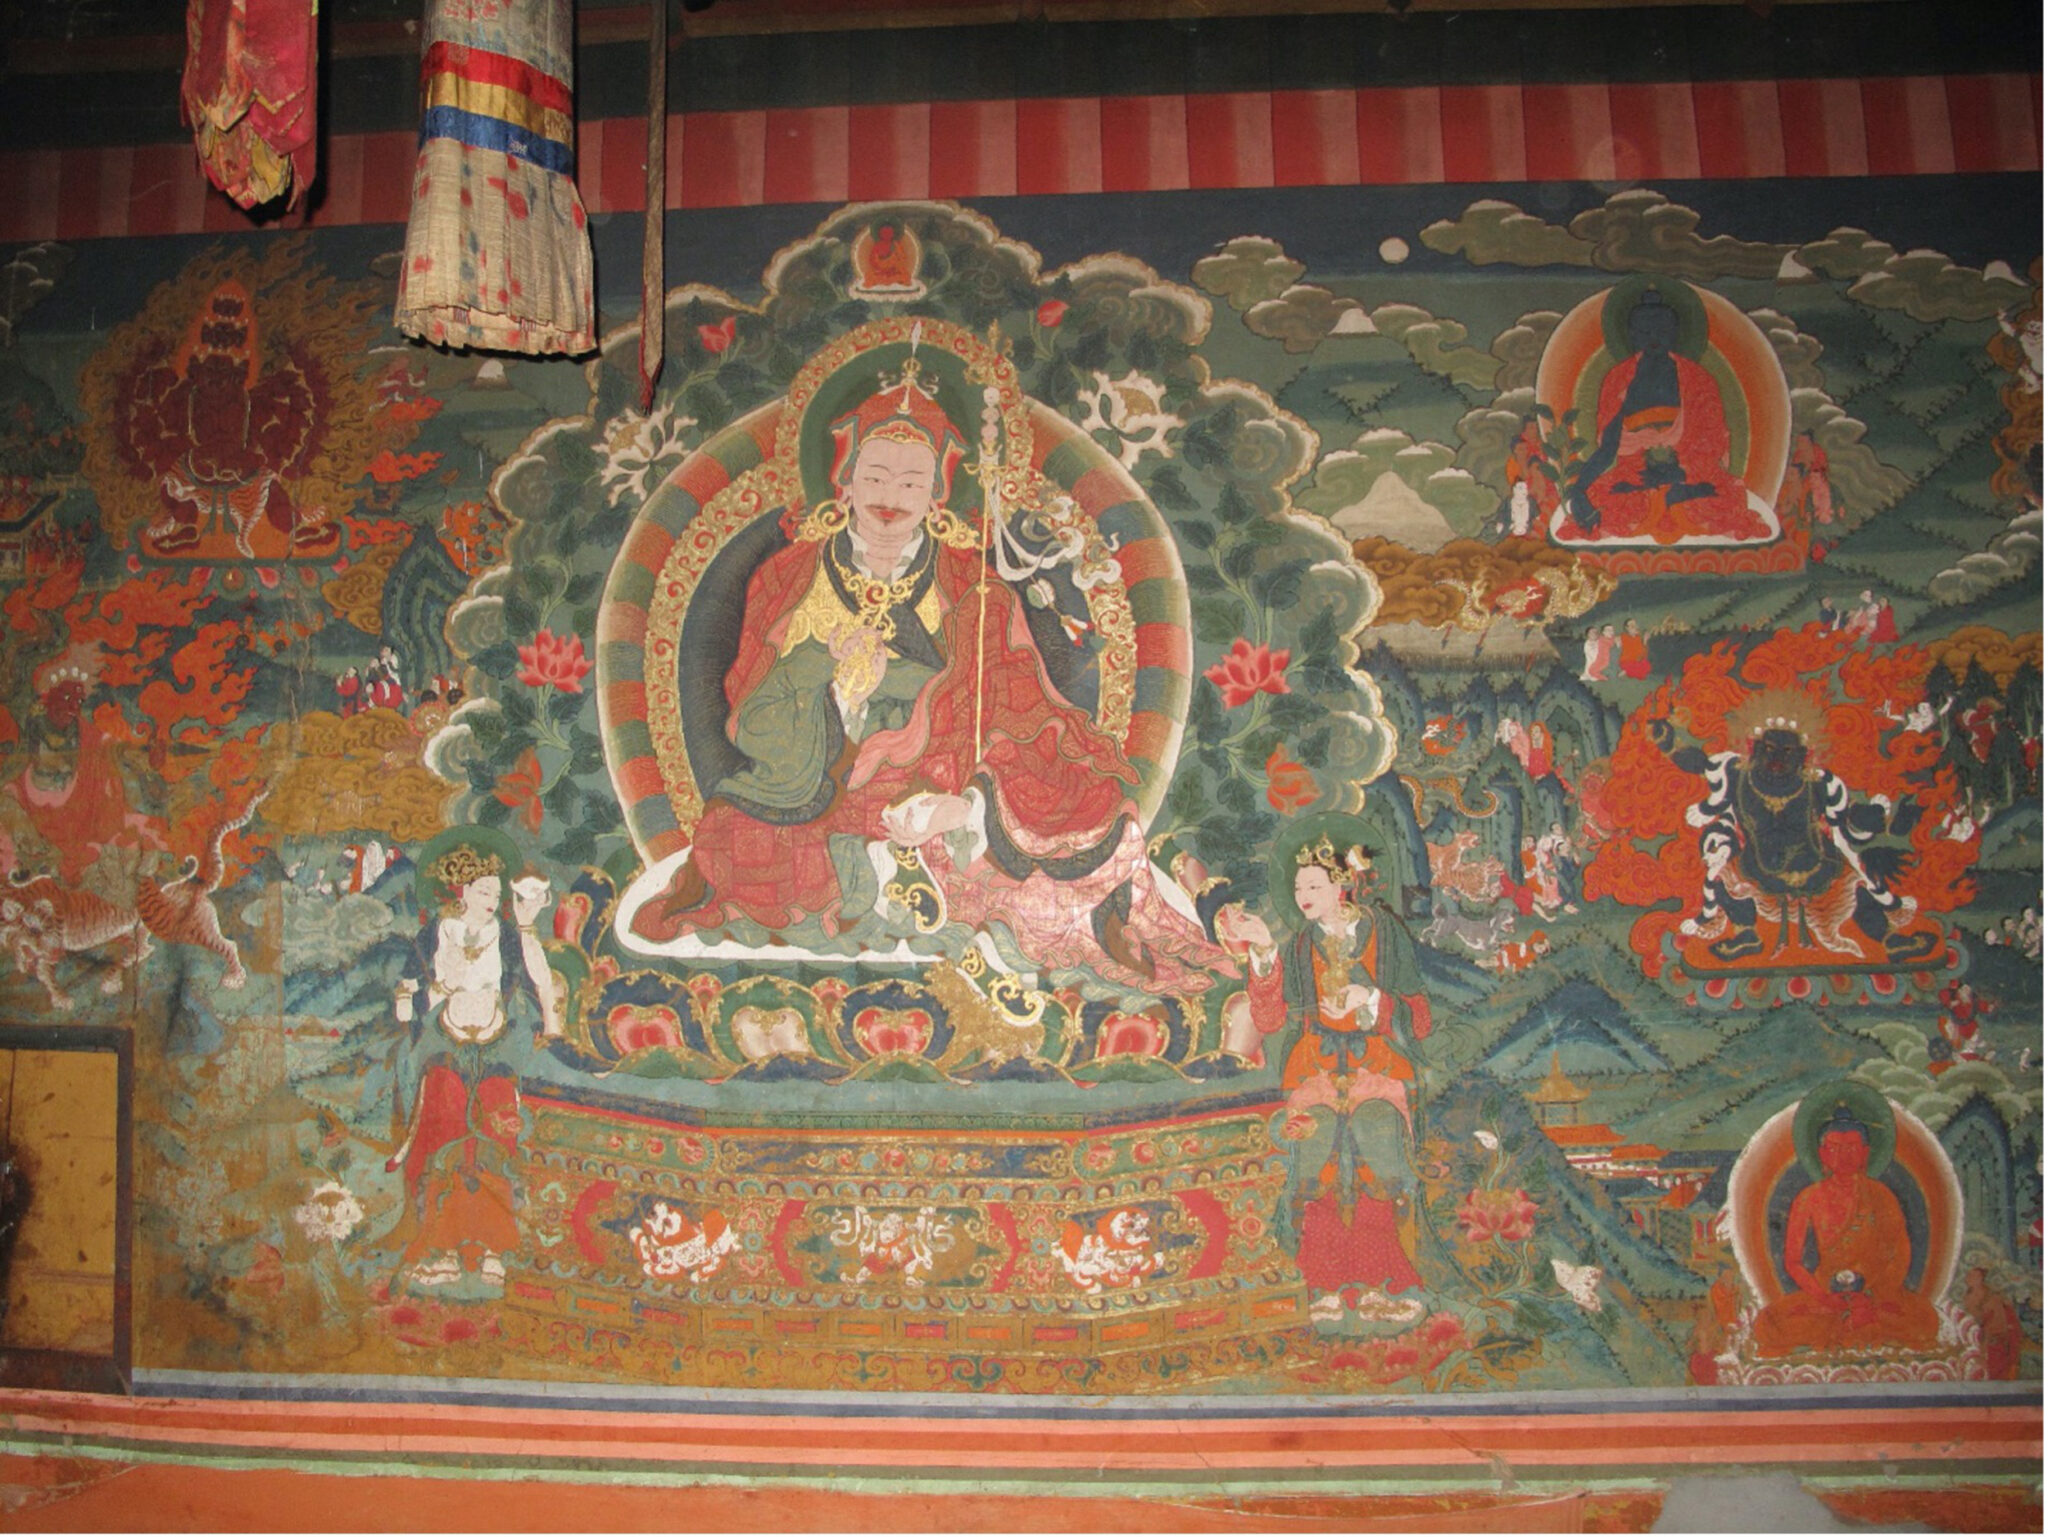 Mural depicting Guru holding staff, seated before flowery nimbus, flanked by attendants and deity portraits